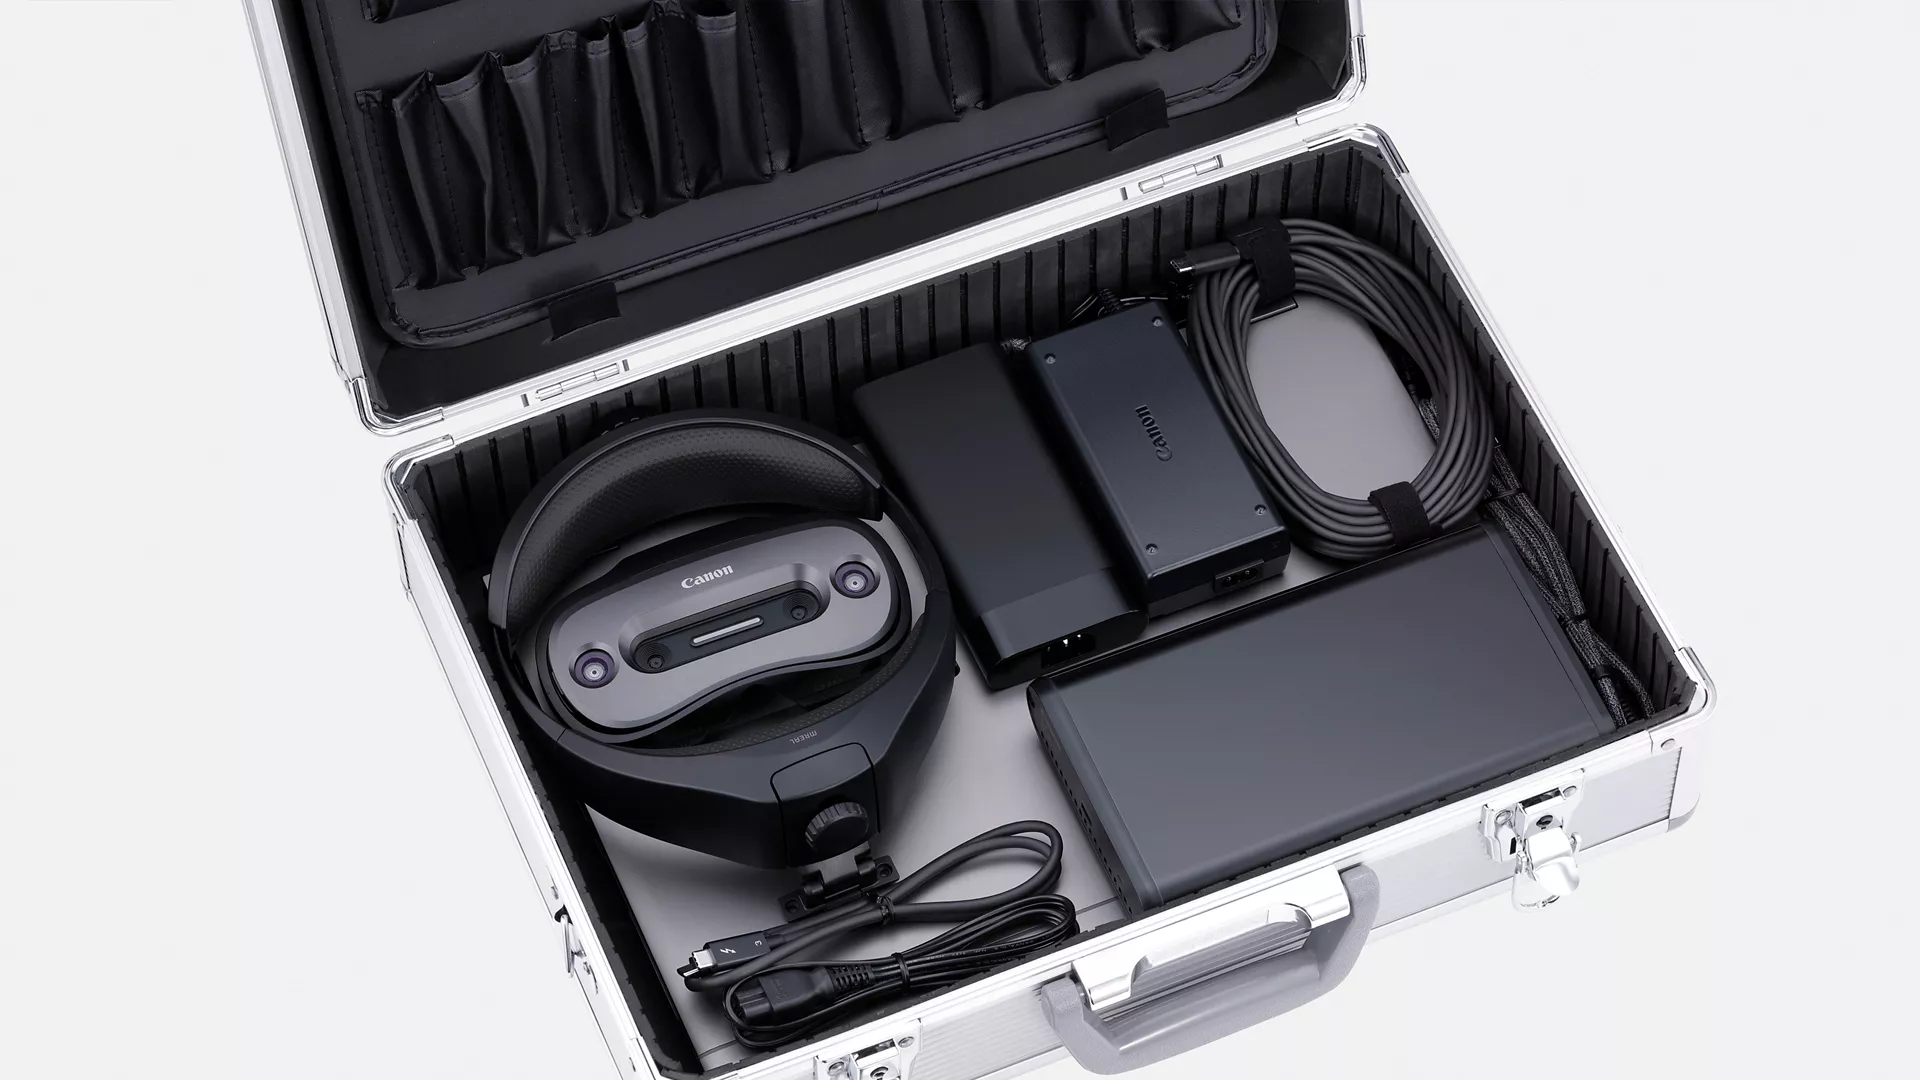 MREAL Headset with Accessories in a Briefcase